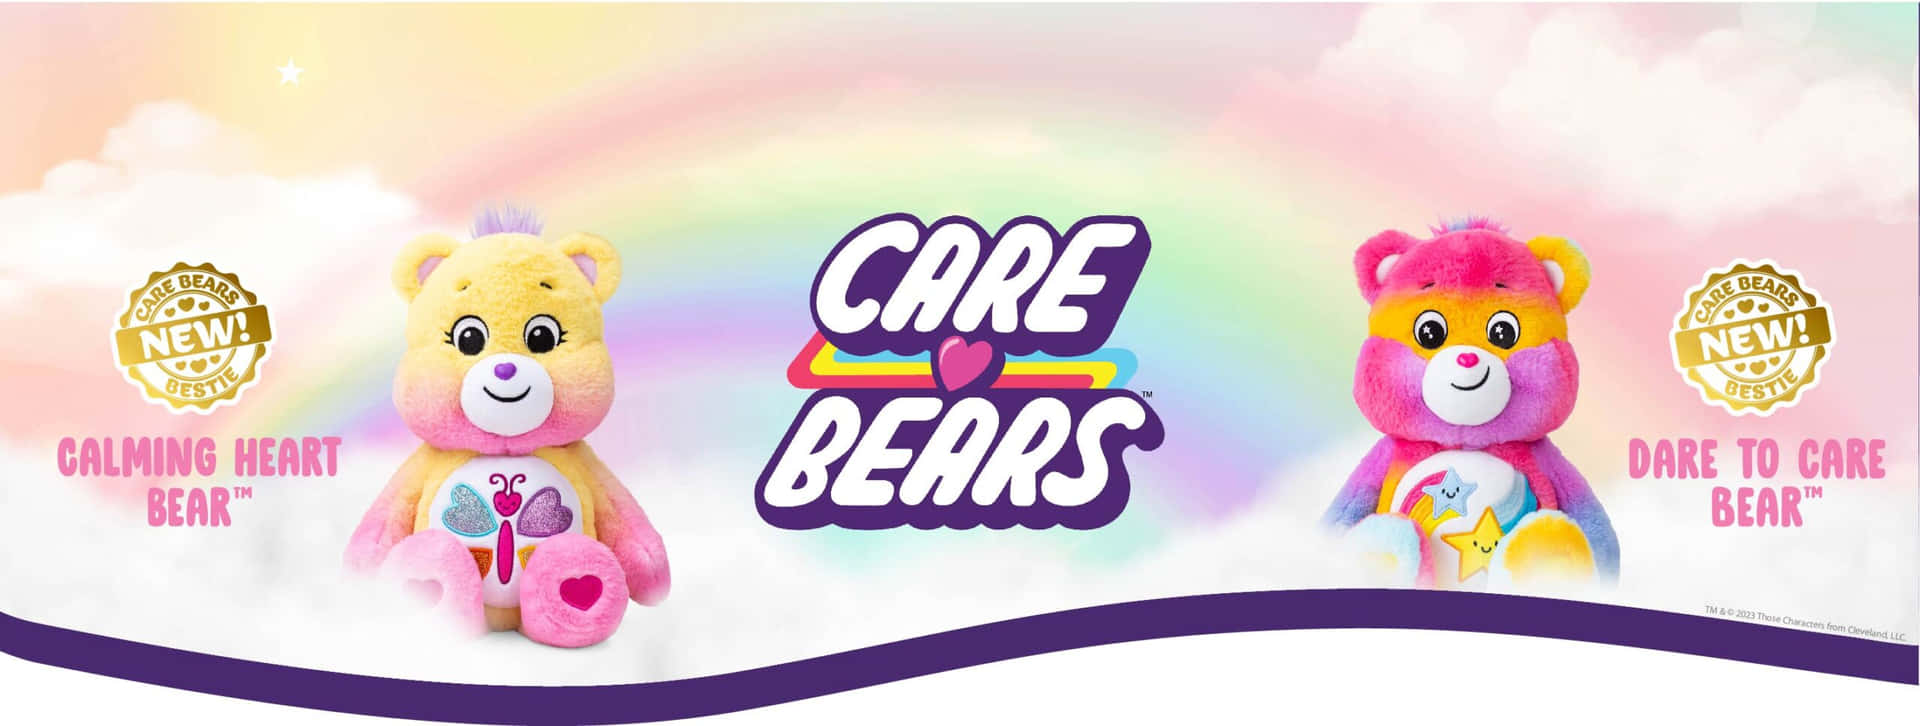 Enjoy Your Care-Filled Days with the Care Bears